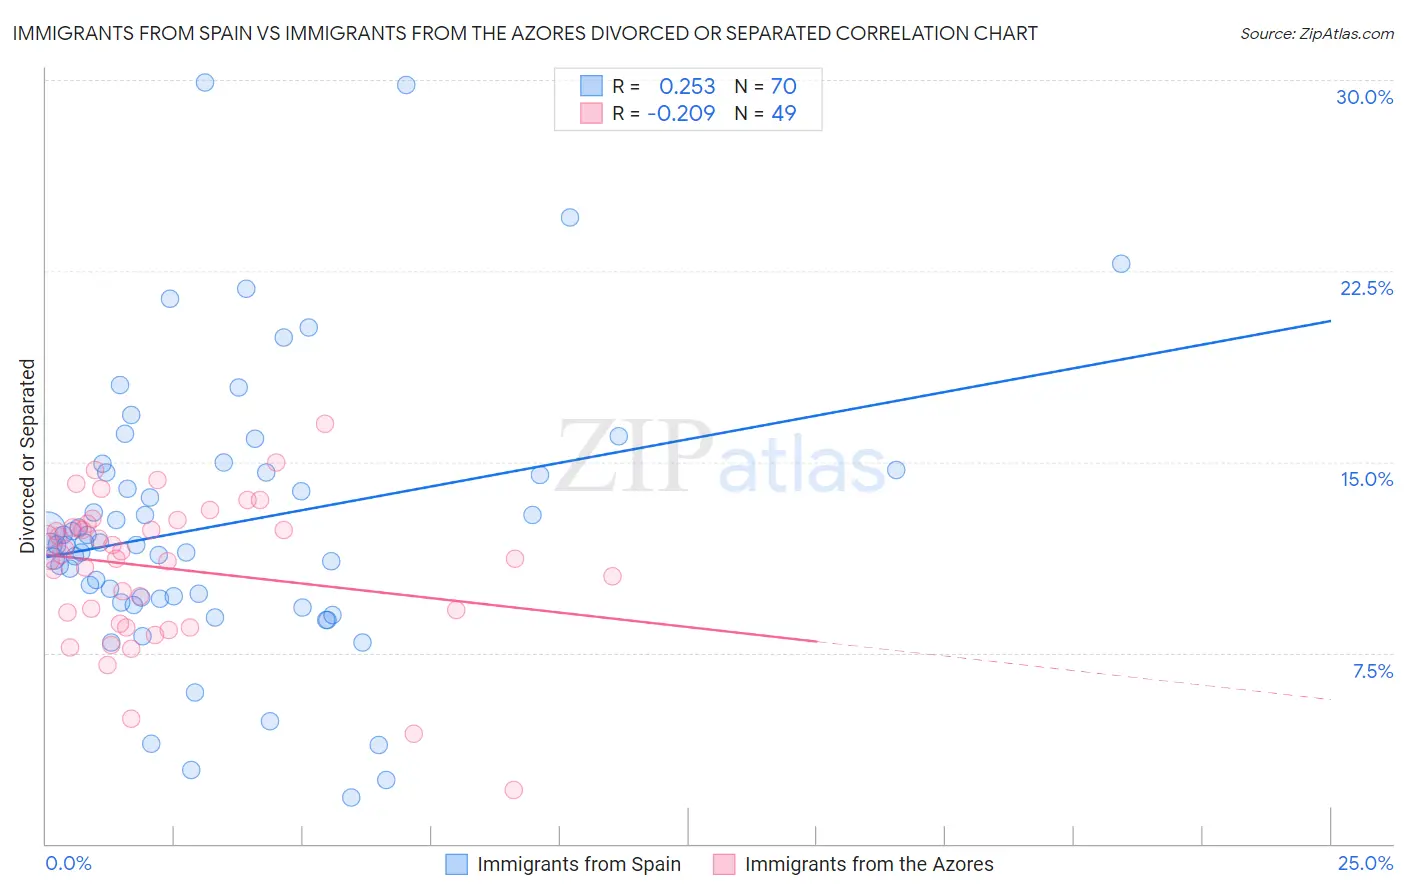 Immigrants from Spain vs Immigrants from the Azores Divorced or Separated